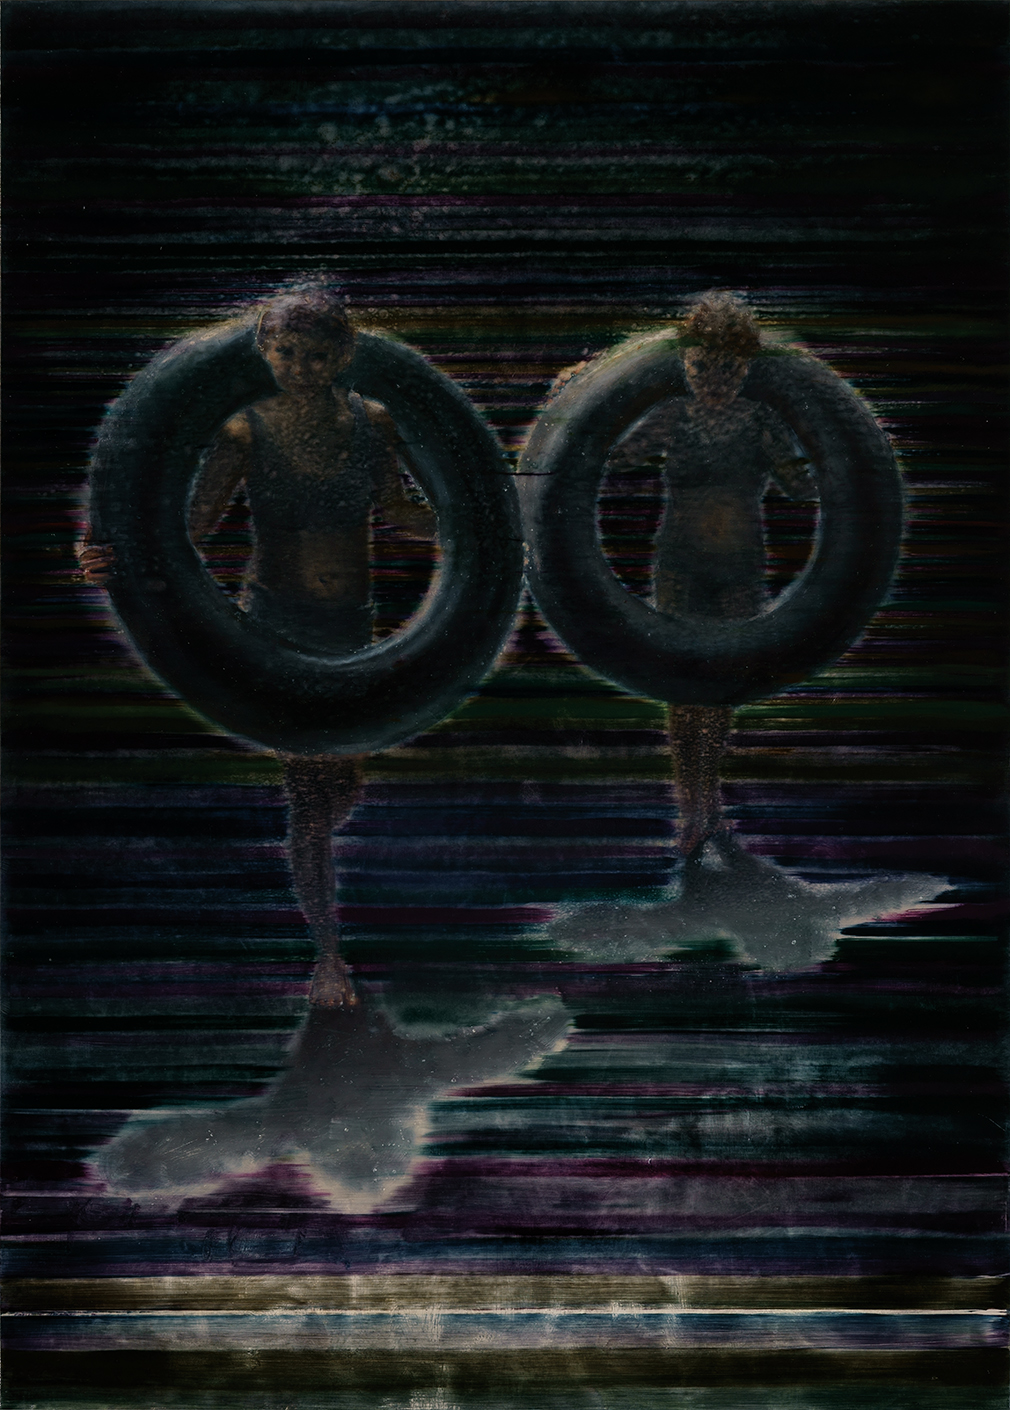 nocturnal bathers, oil on gesso on plywood, 140x100cm. 2019